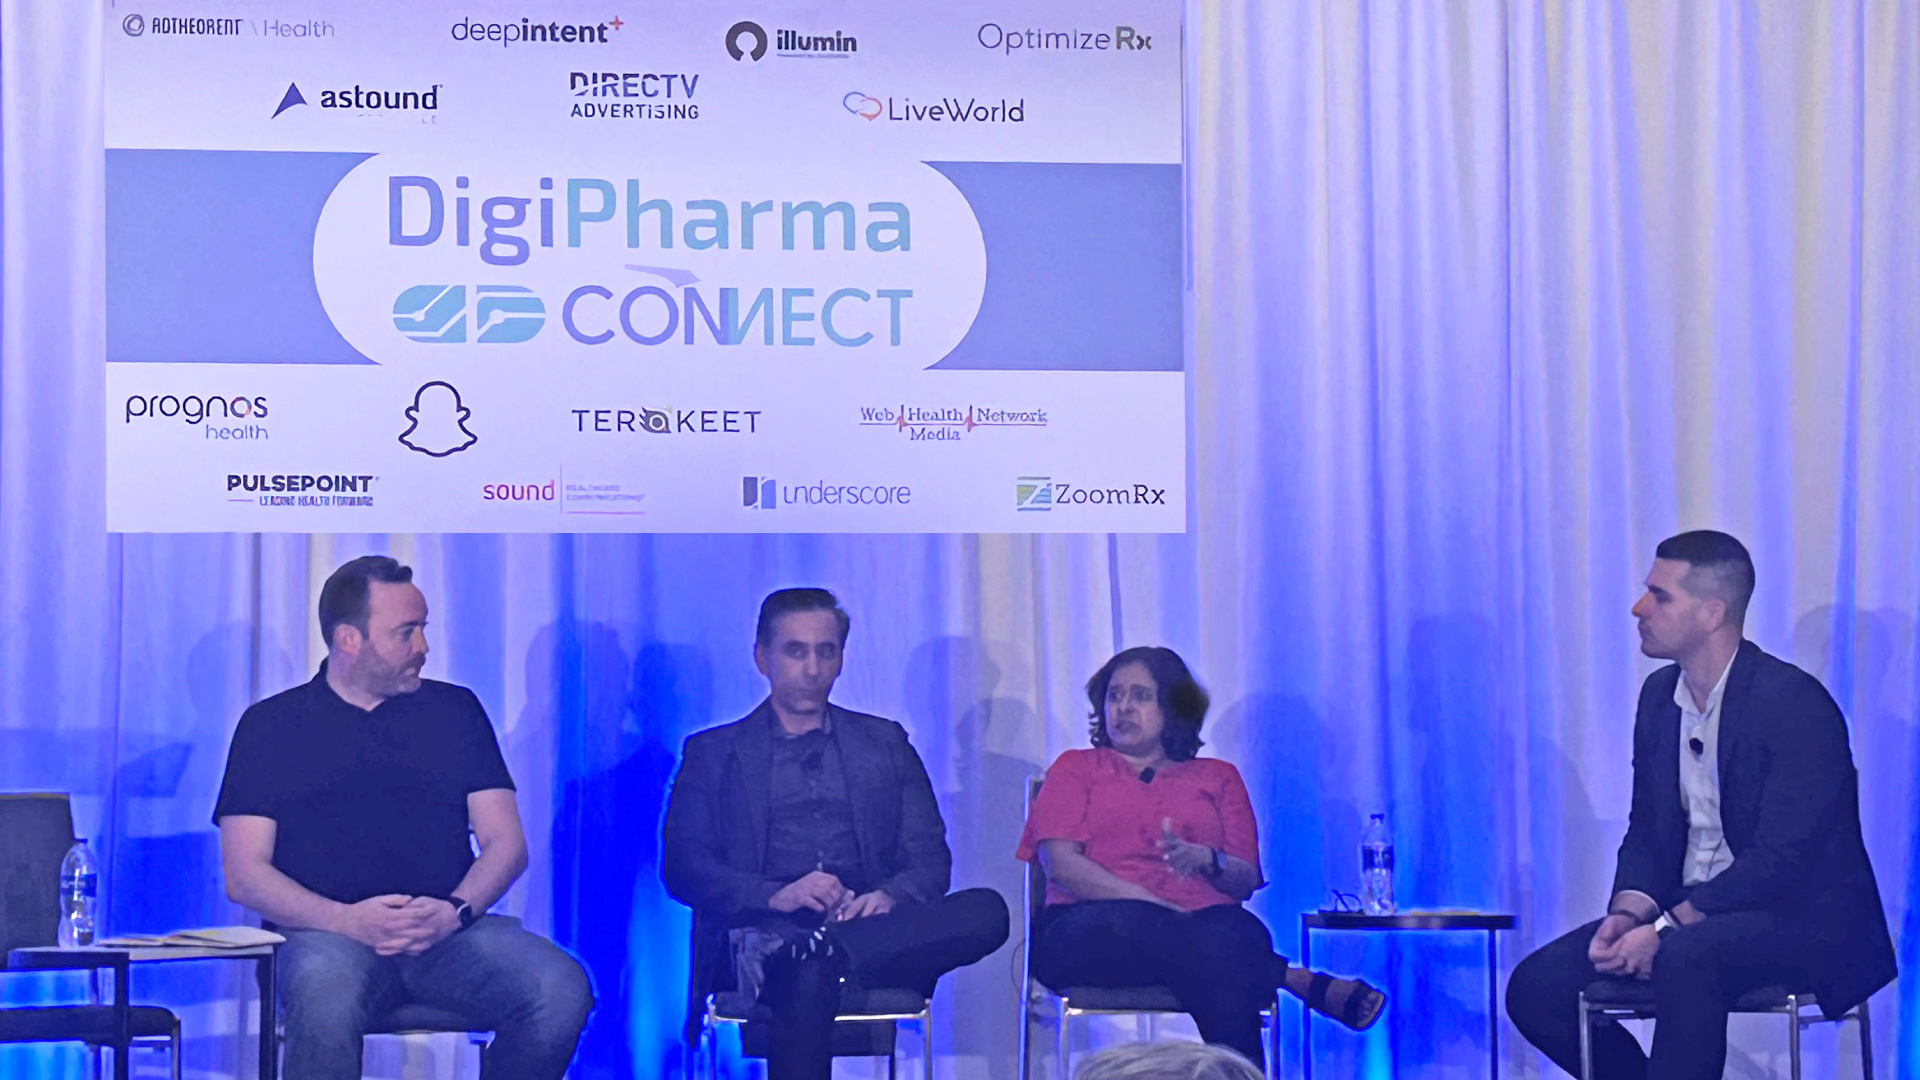 DigiPharma Connect Stage and Speakers